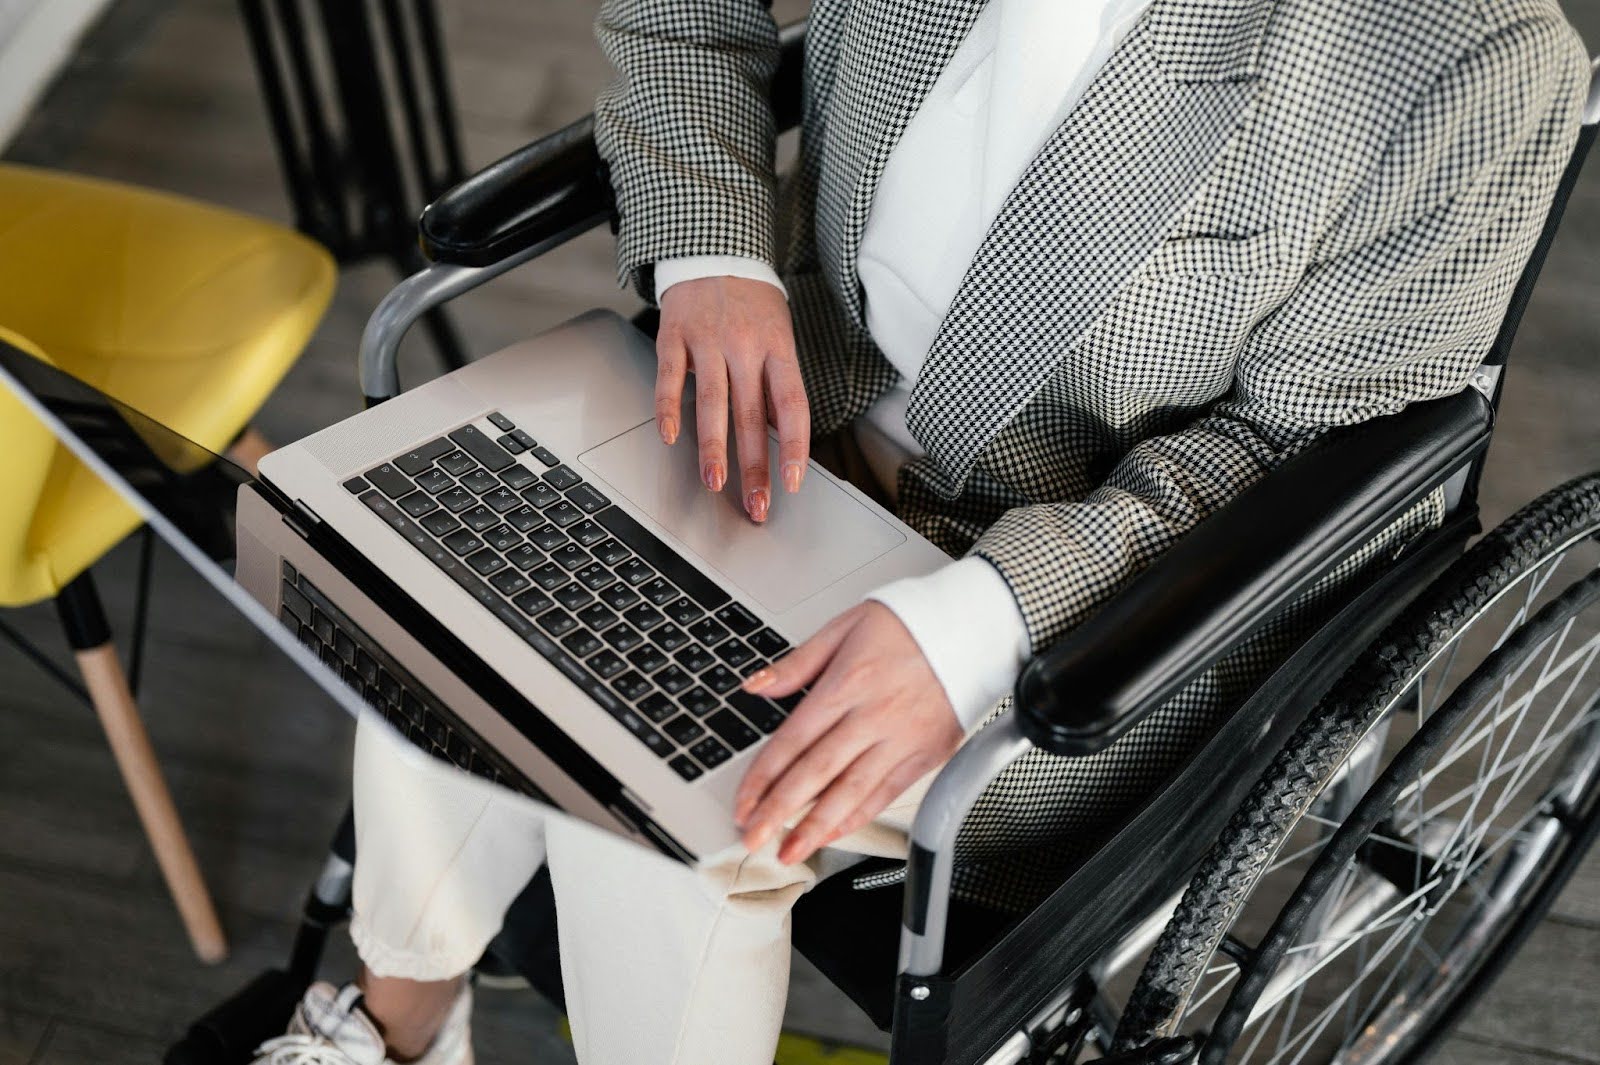 A man in a wheelchair types on a laptop